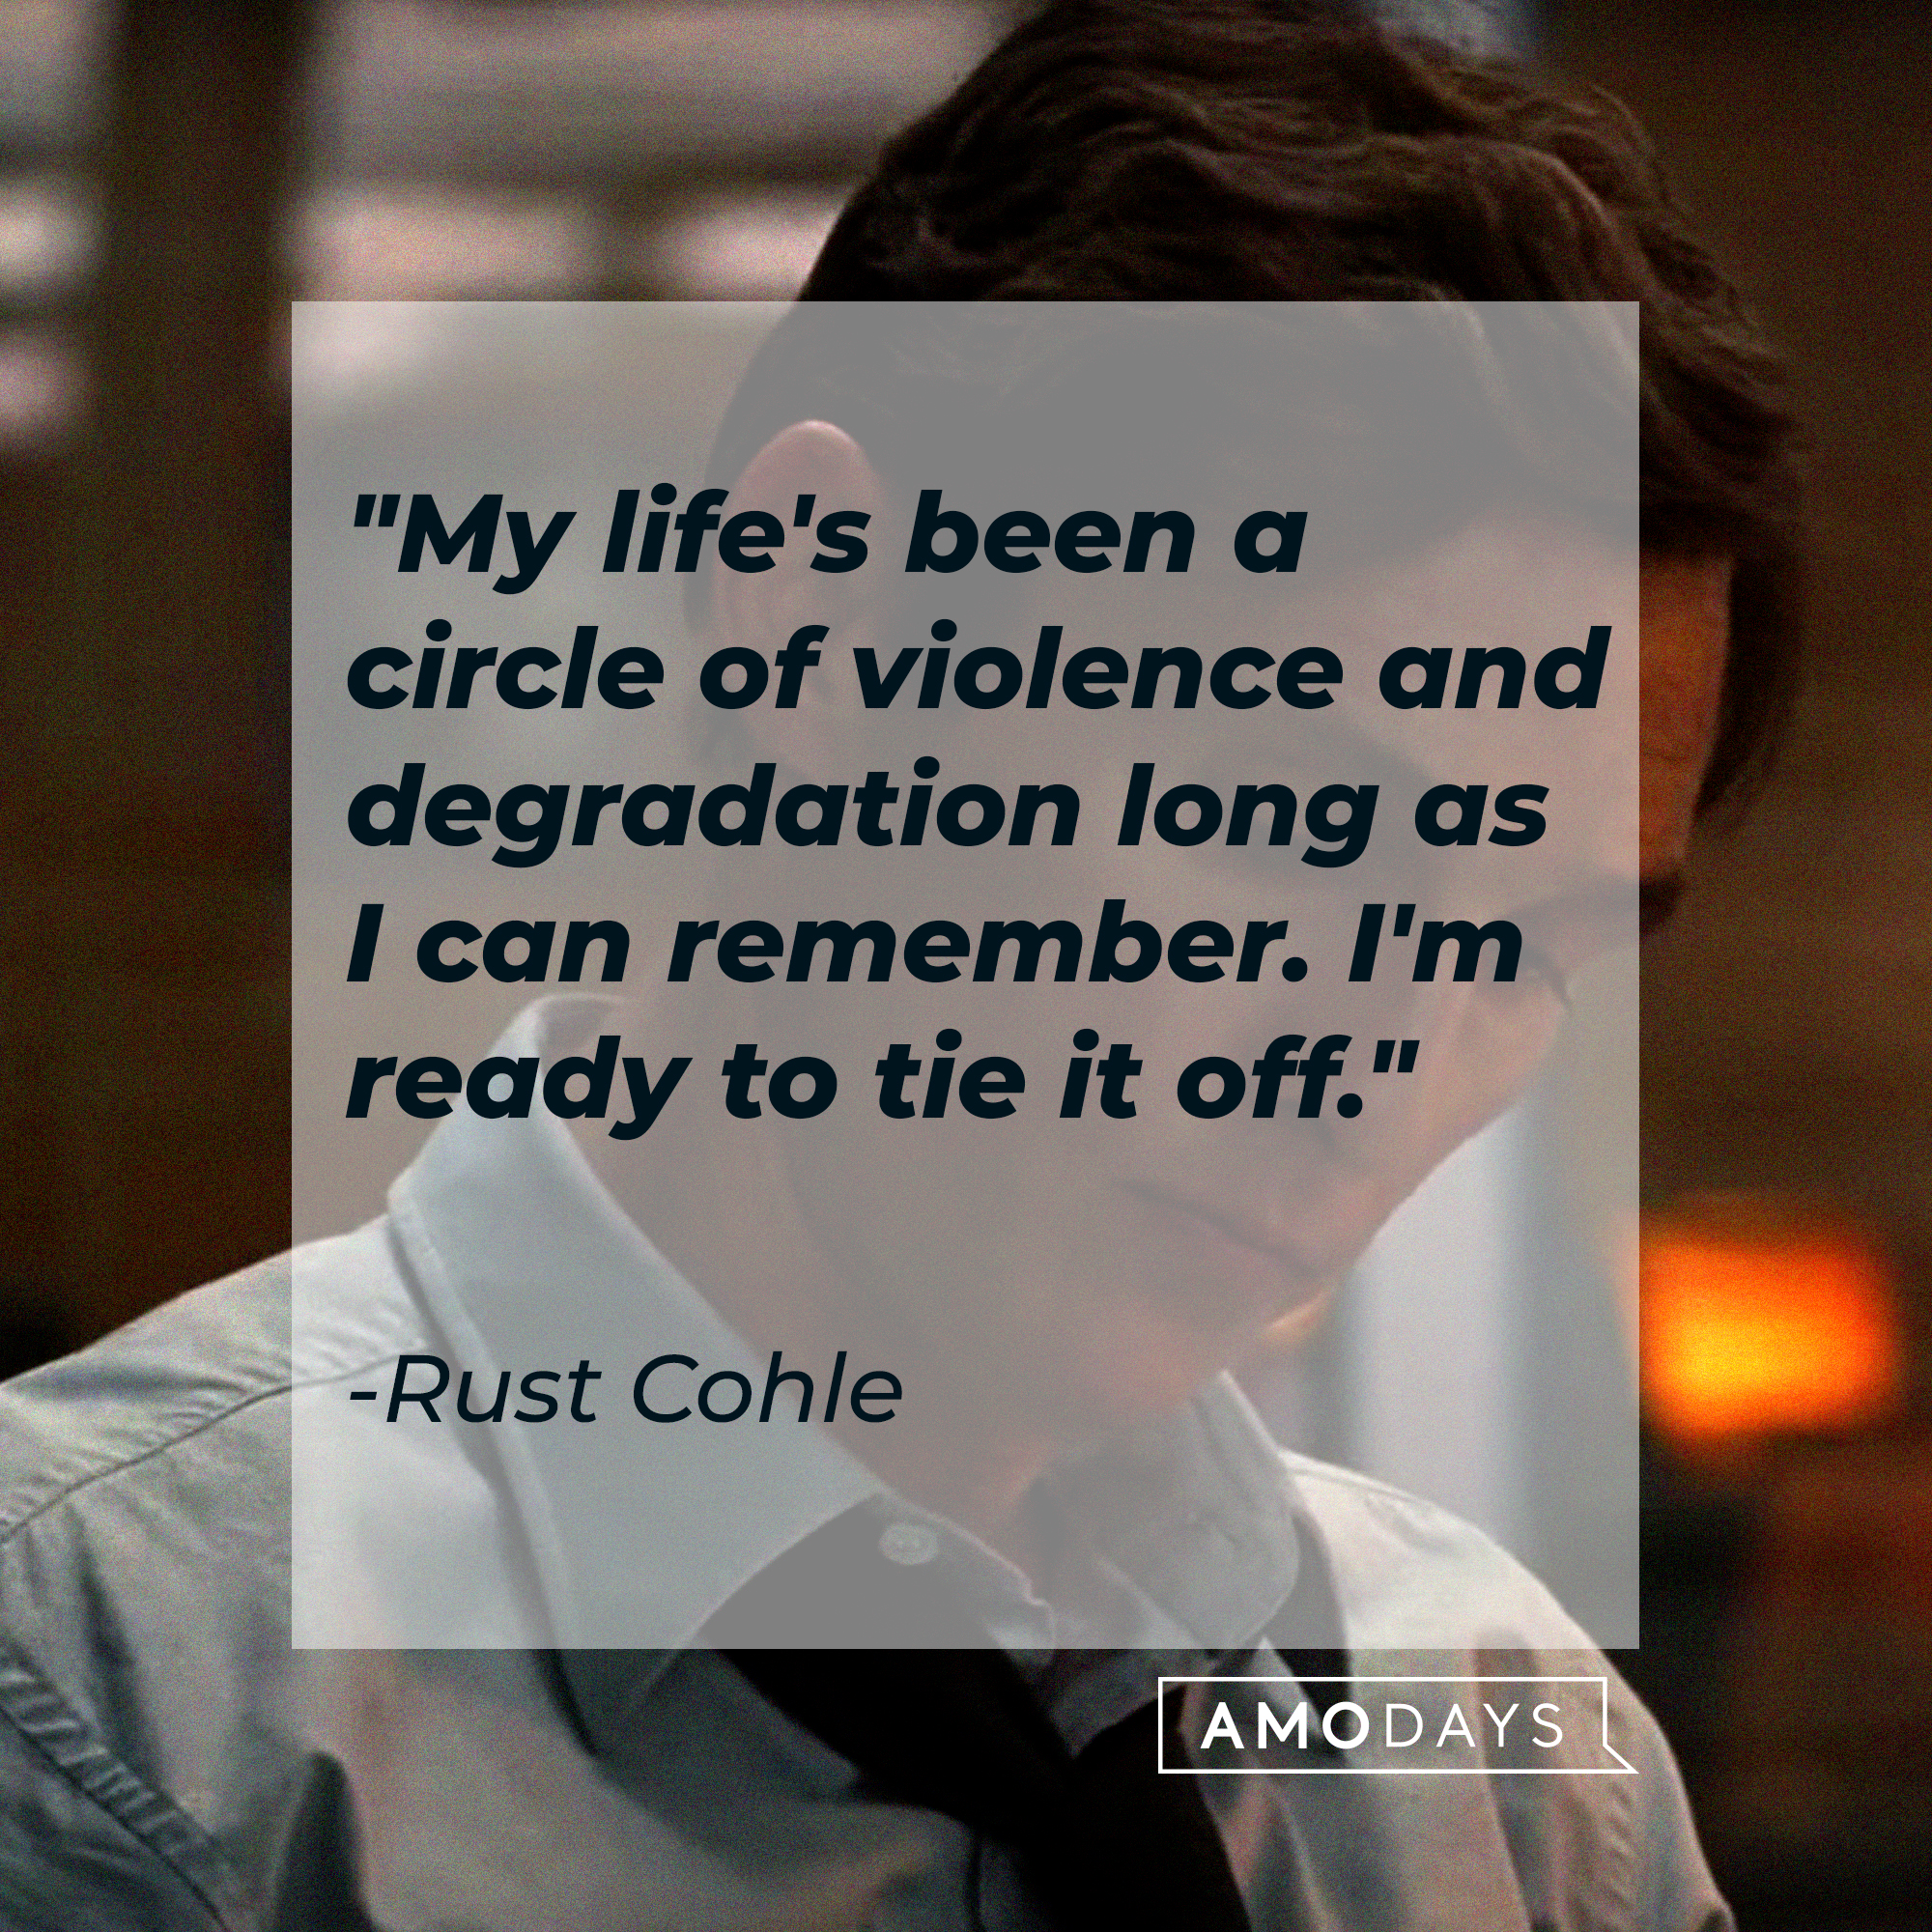 Rust Cohle's quote: "My life's been a circle of violence and degradation long as I can remember. I'm ready to tie it off." | Source: facebook.com/TrueDetective